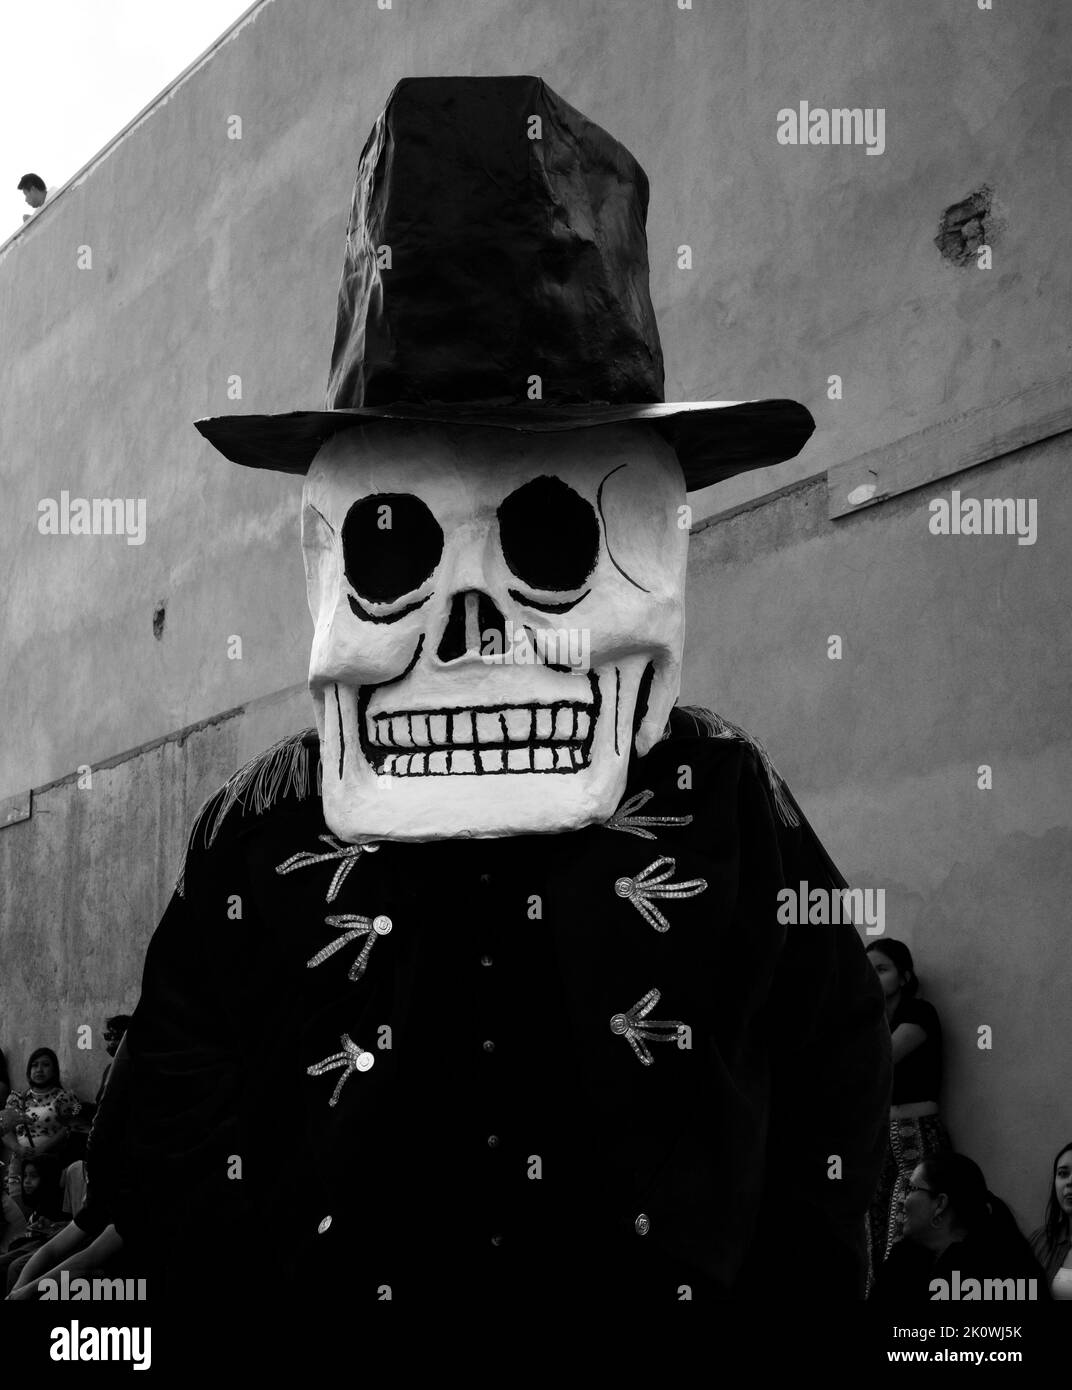 A person in a scary skull costume during the Los Locos festival in San Miguel de Allende, Mexico Stock Photo